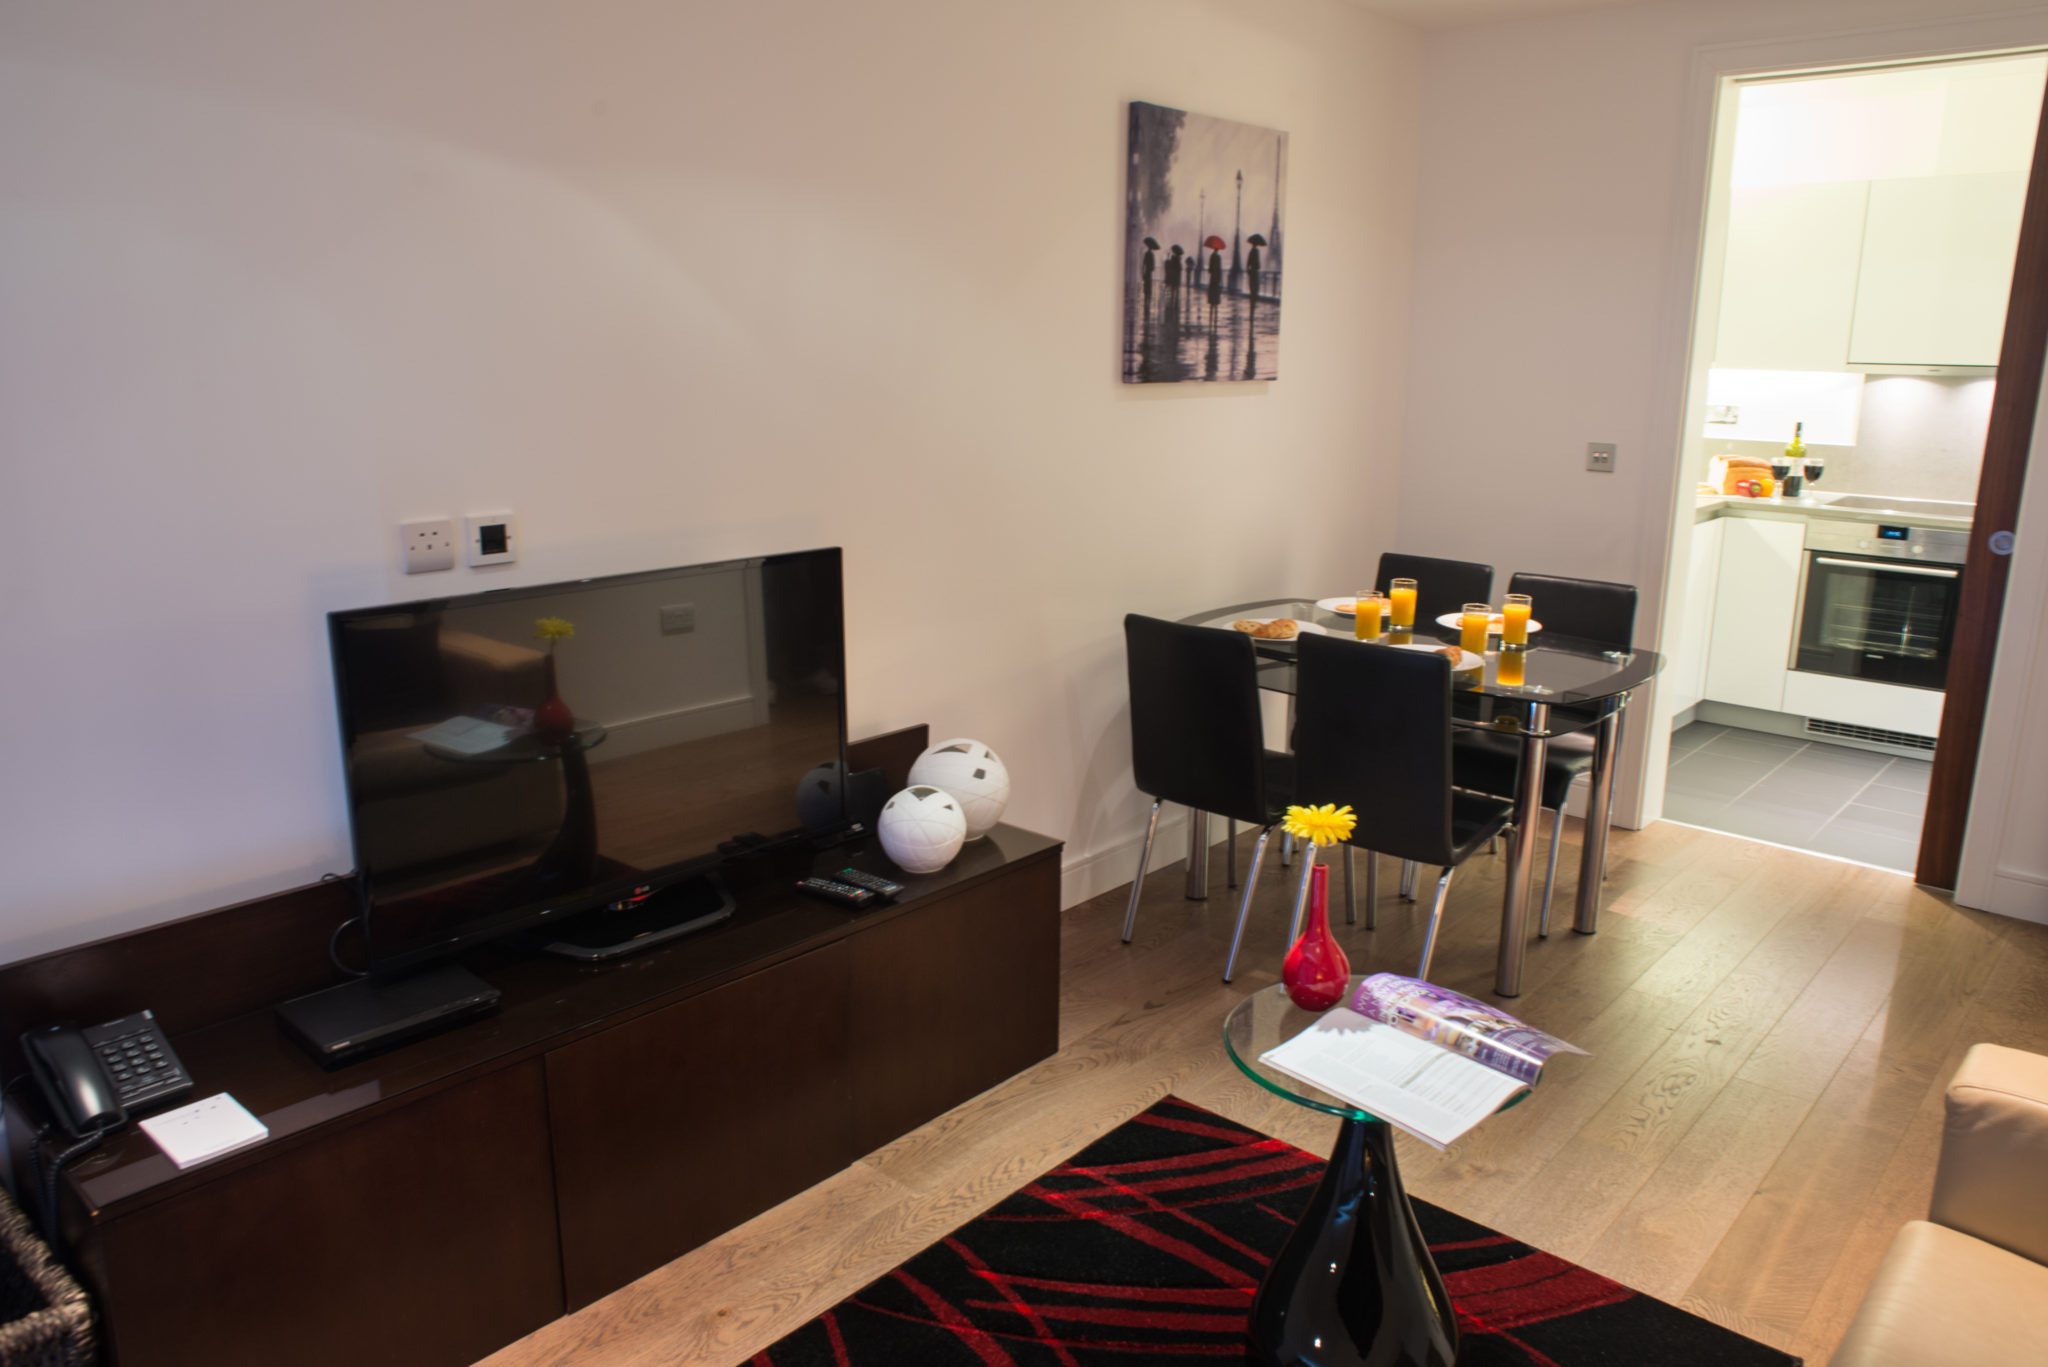 Serviced-Apartments-Ealing-|-Corporate-Accommodation-West-London-|-Short-Lets-|-Corporate-Housing-|-Relocation-|-Award-Winning-&-Quality-Accredited-BOOK-NOW---Urban-Stay